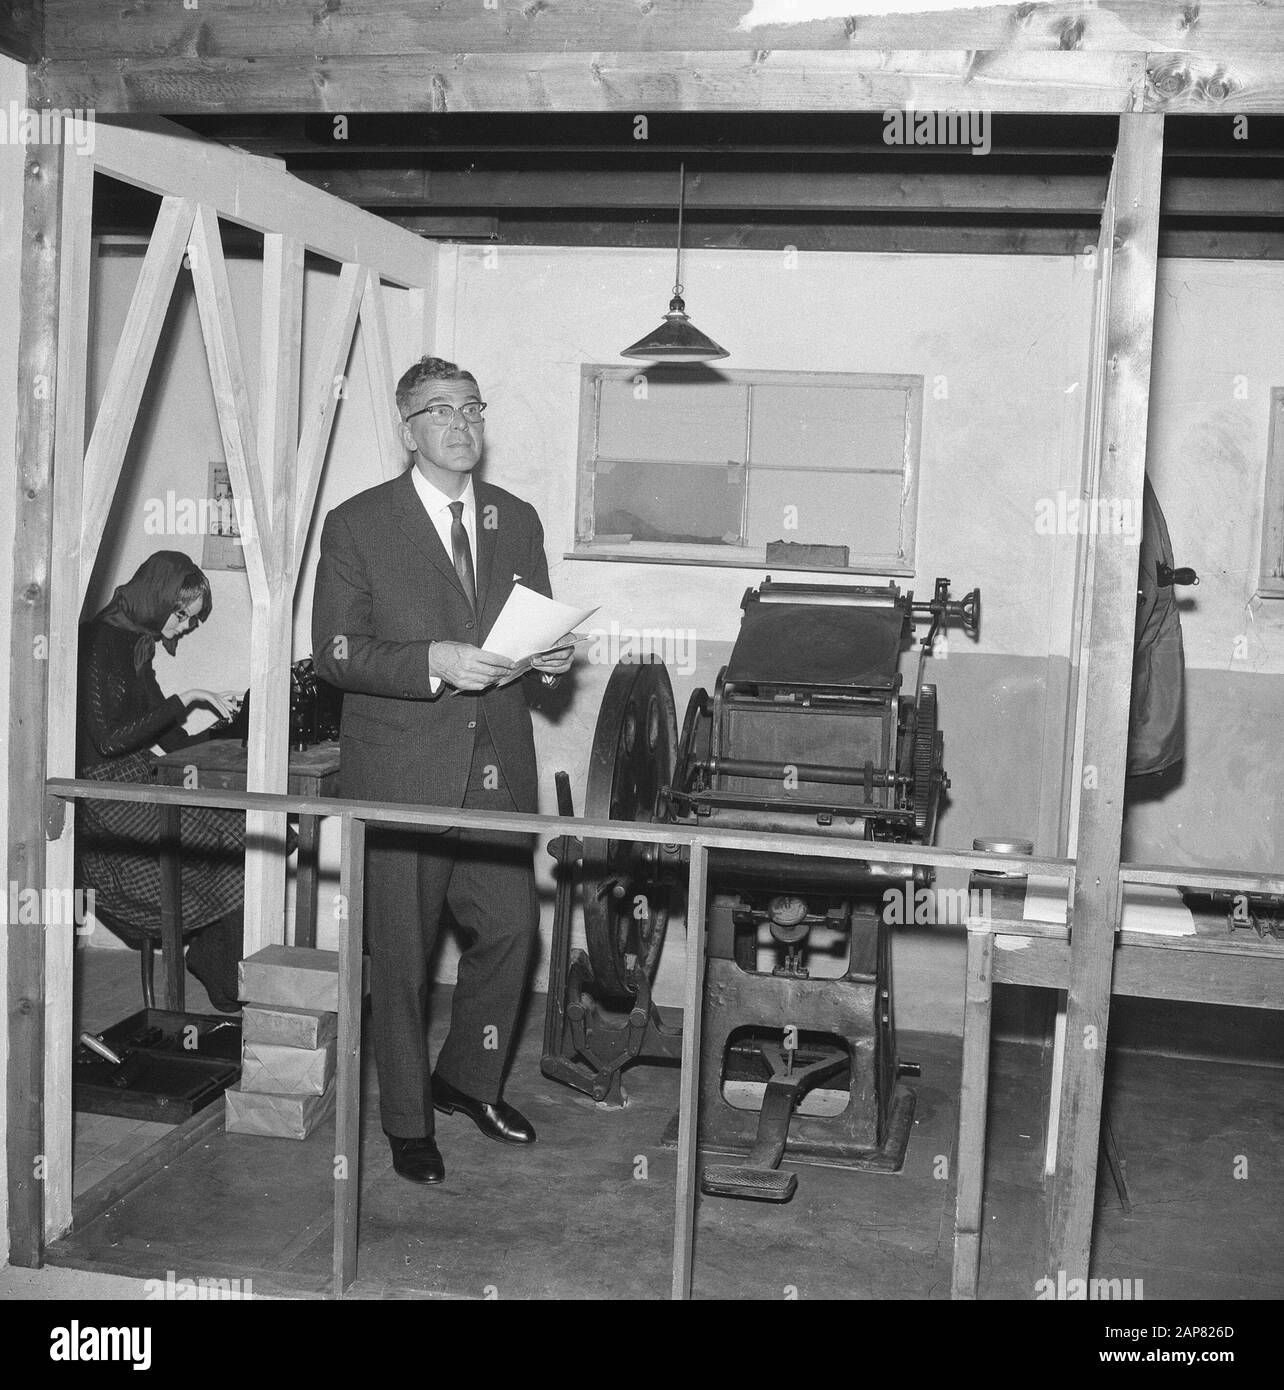 Mayor Thomassen performed first official act, opened exhibition A heart under the belt, here during the tour Date: April 23, 1965 Keywords: tours, exhibitions Personal name: Thomassen, Wim Stock Photo